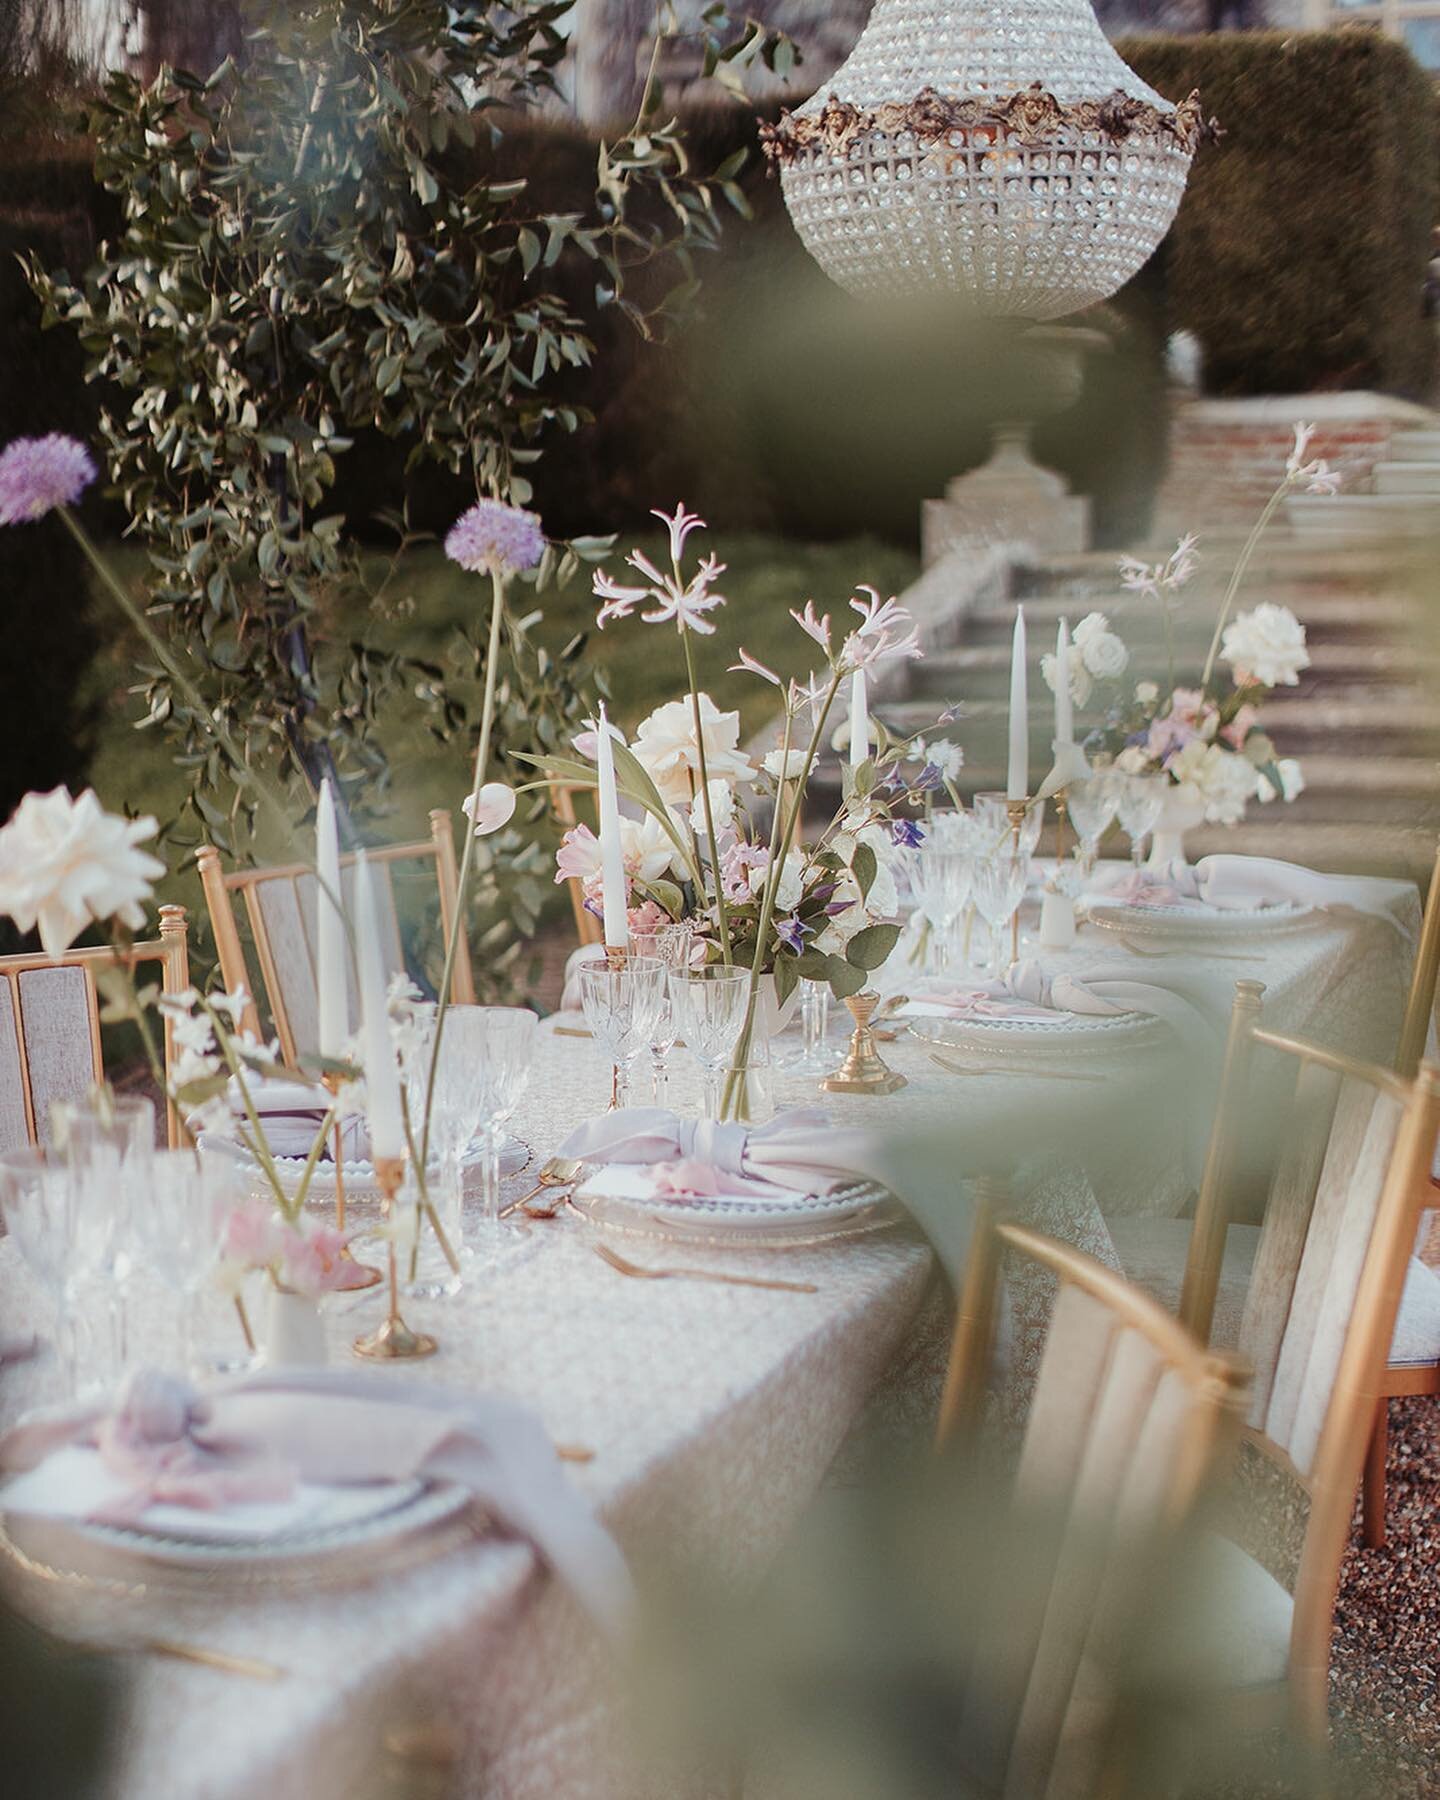 Intimate dining amongst dreamy Spring florals 🌷💫

With rambling foliage climbing to stunning chandeliers twinkling above, and an array of pastel florals across the table 🌸 

A beautiful setting to celebrate your love with those closest to you 💫

